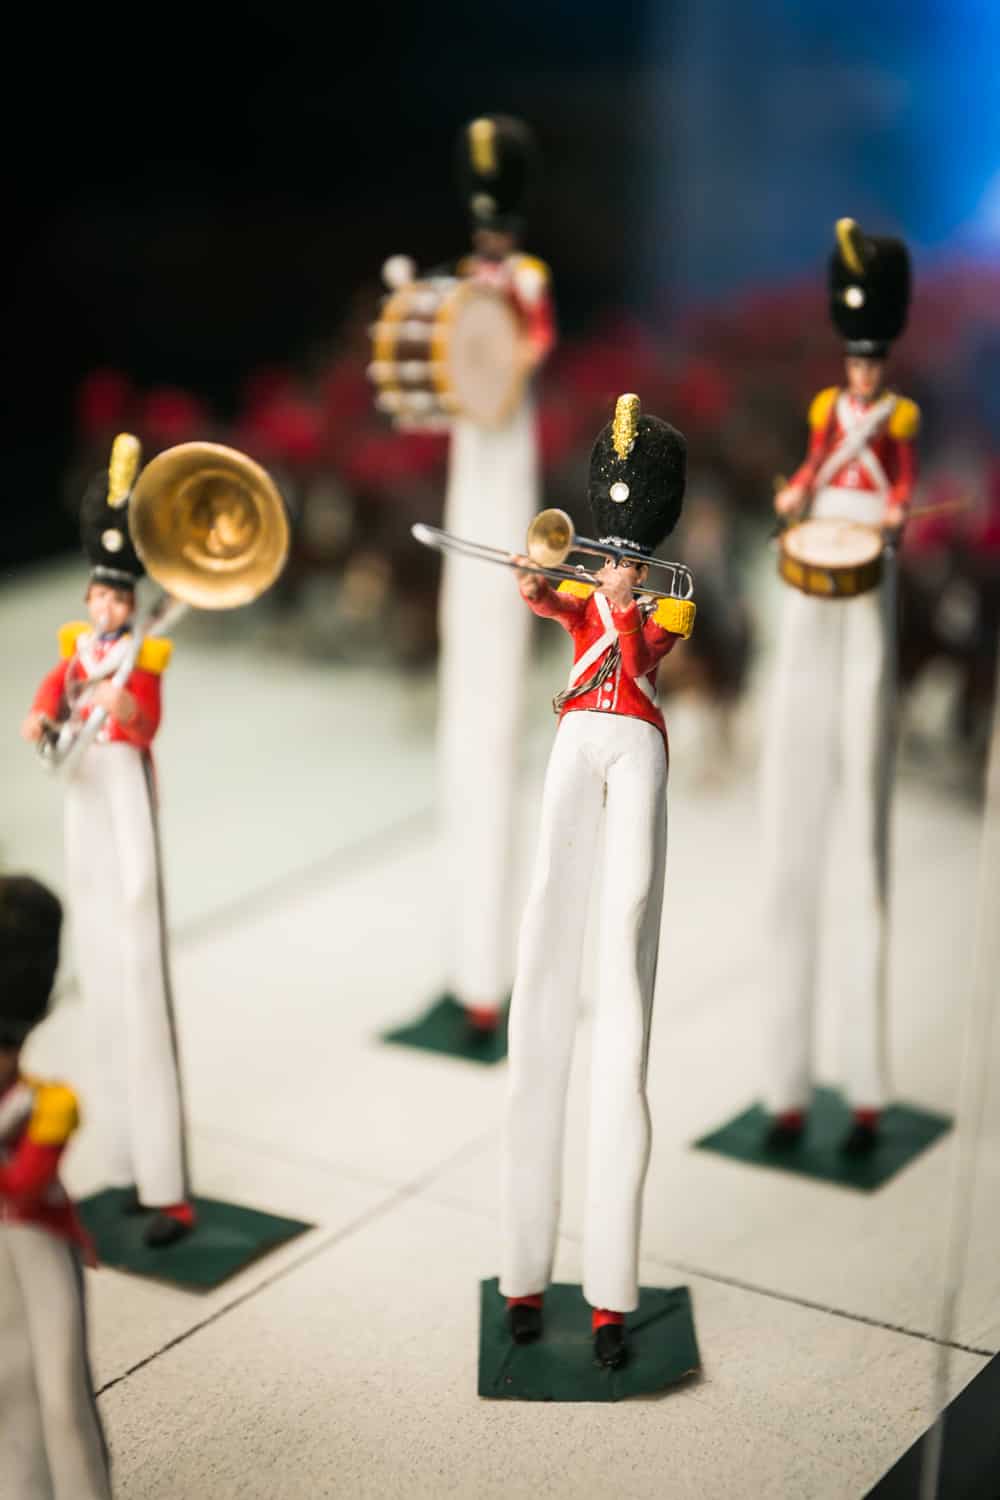 Miniature band performers with extra long legs